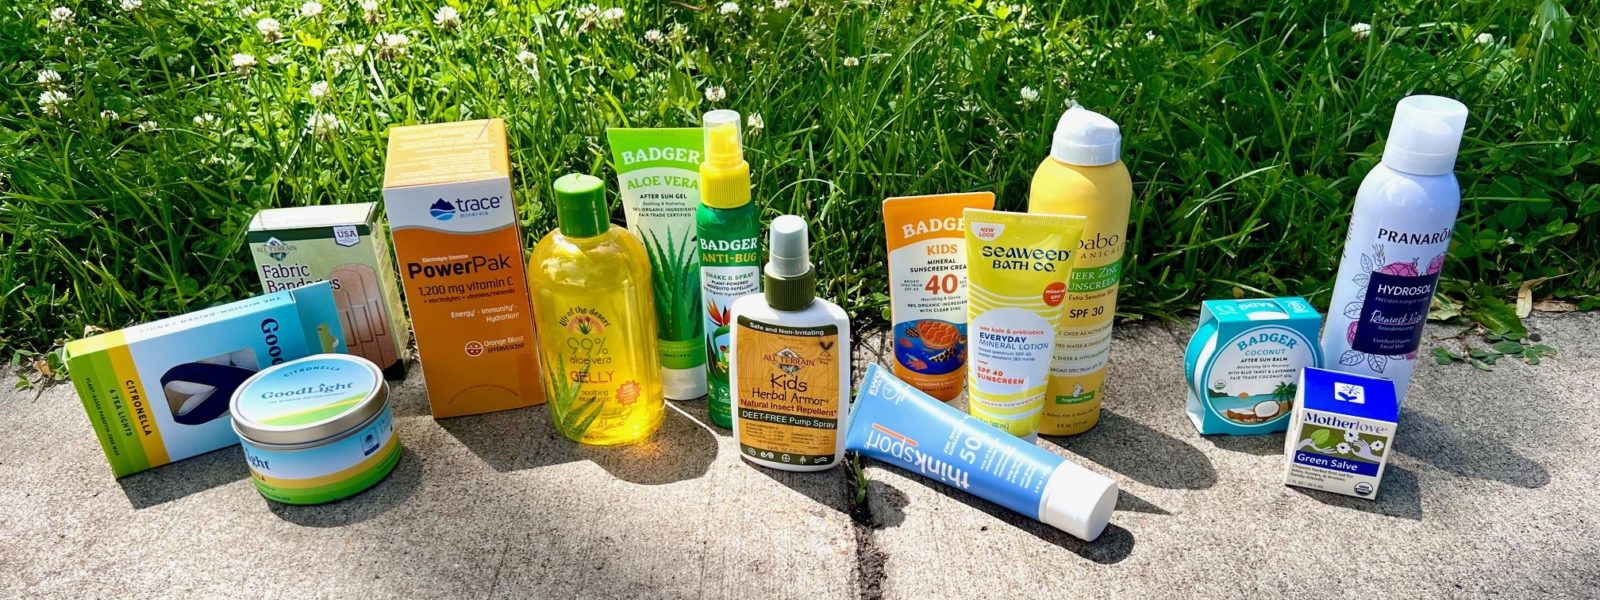 A variety of Wellness products that are especially useful in the summer months